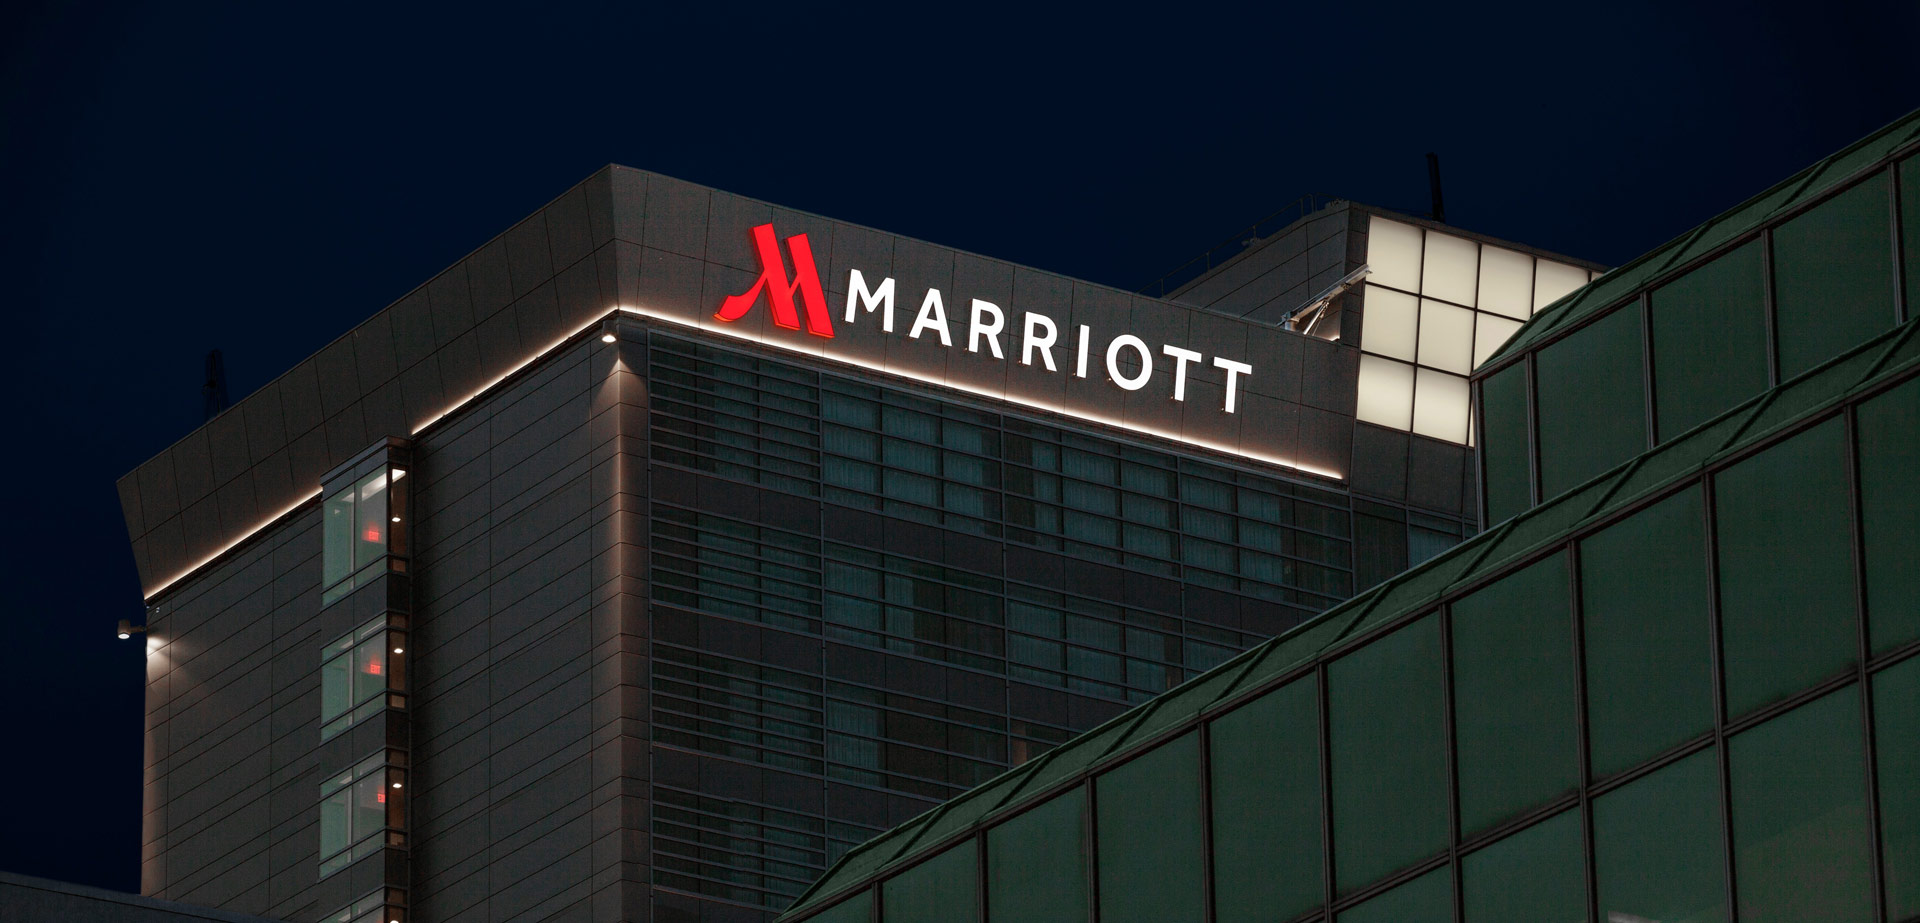 Marriott channel letter sign by Flexlume